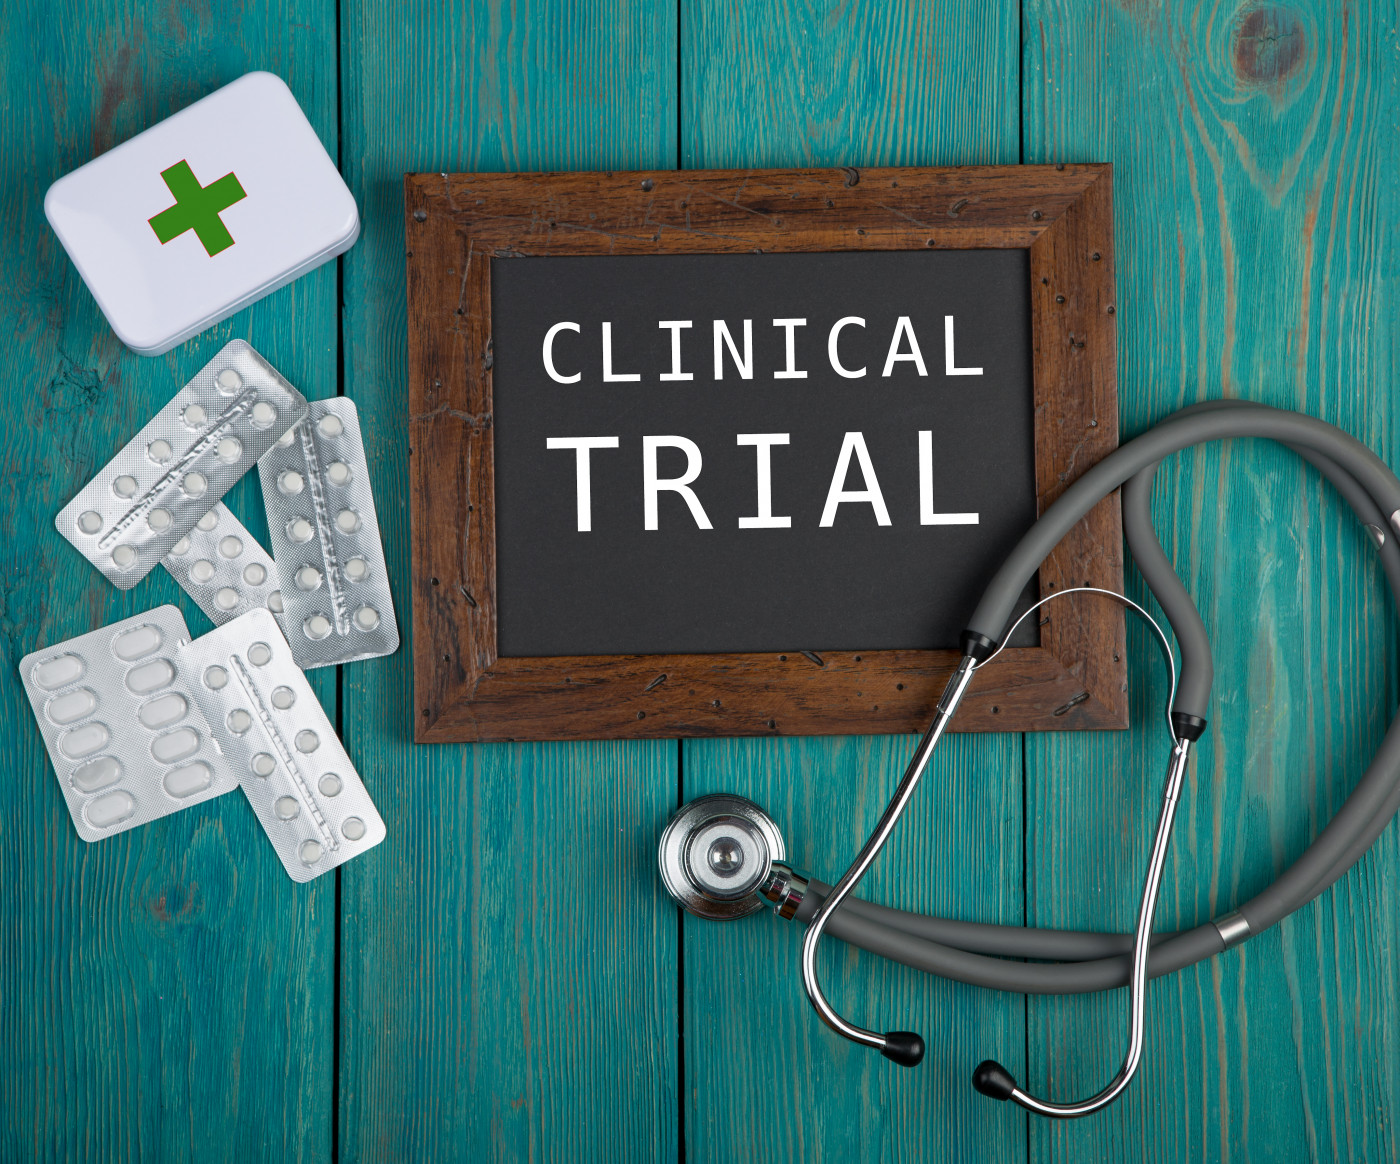 NMD670 clinical trial, the Netherlands